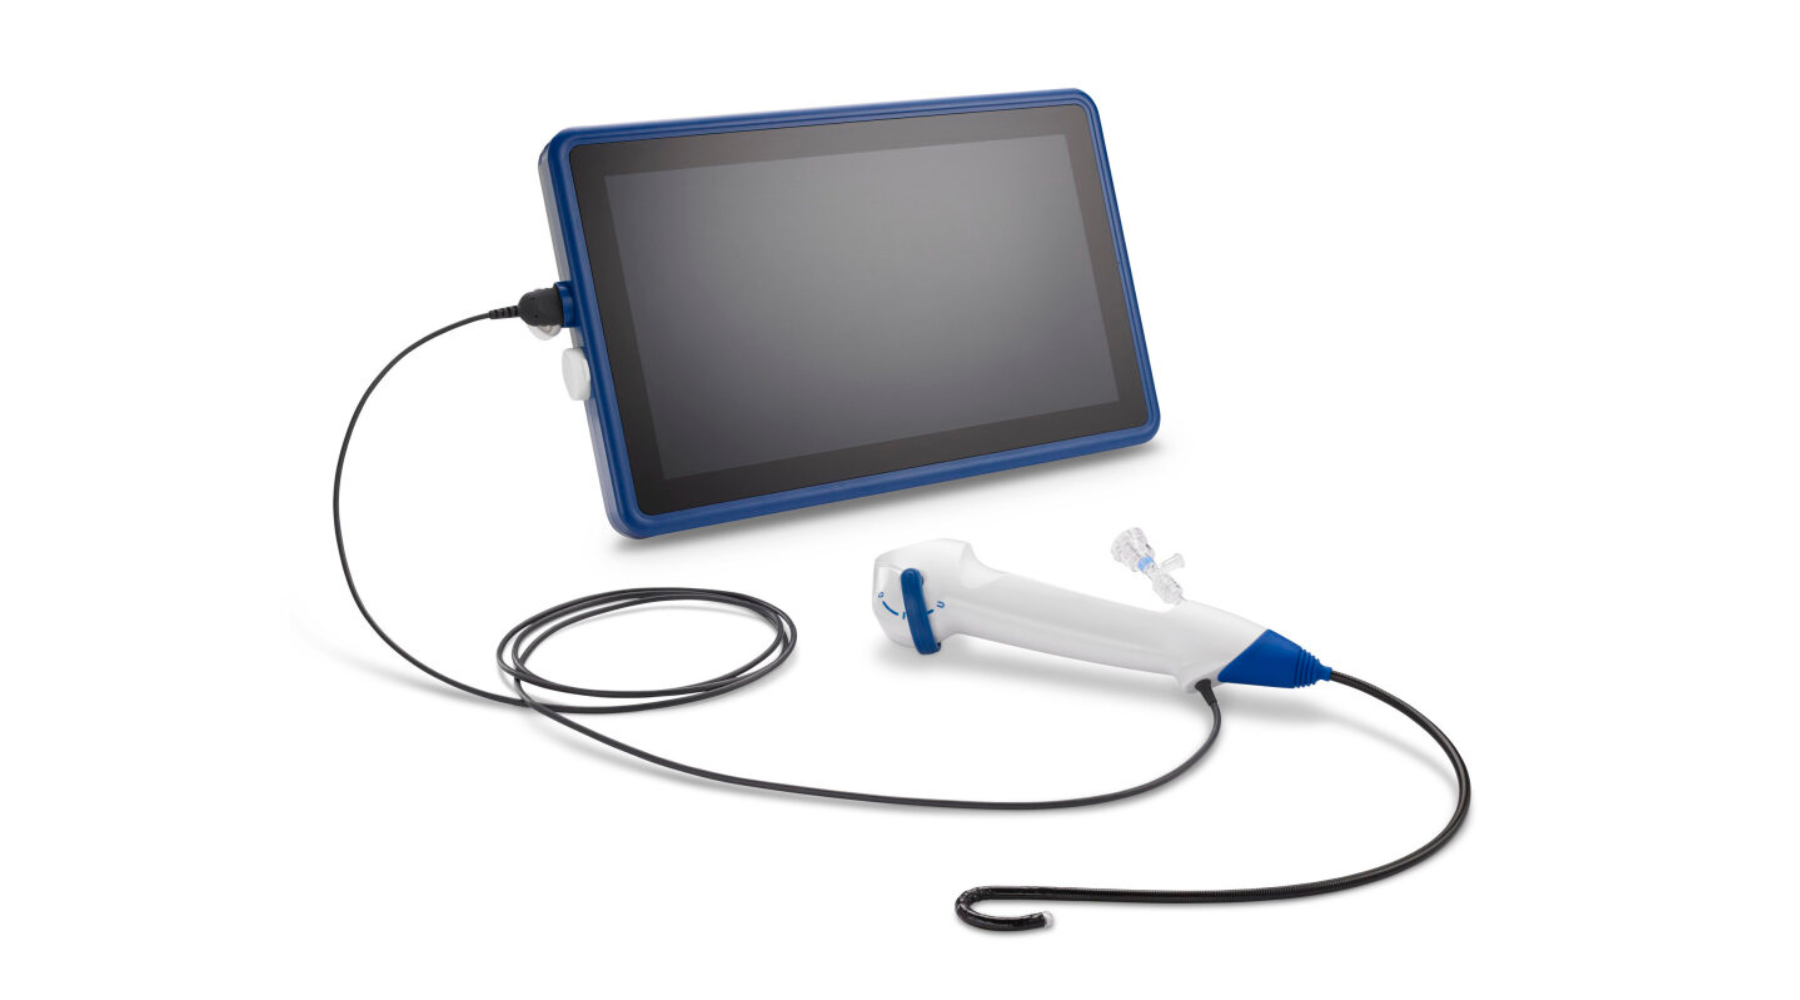 FDA Adds New Tools for Evaluating Medical Devices